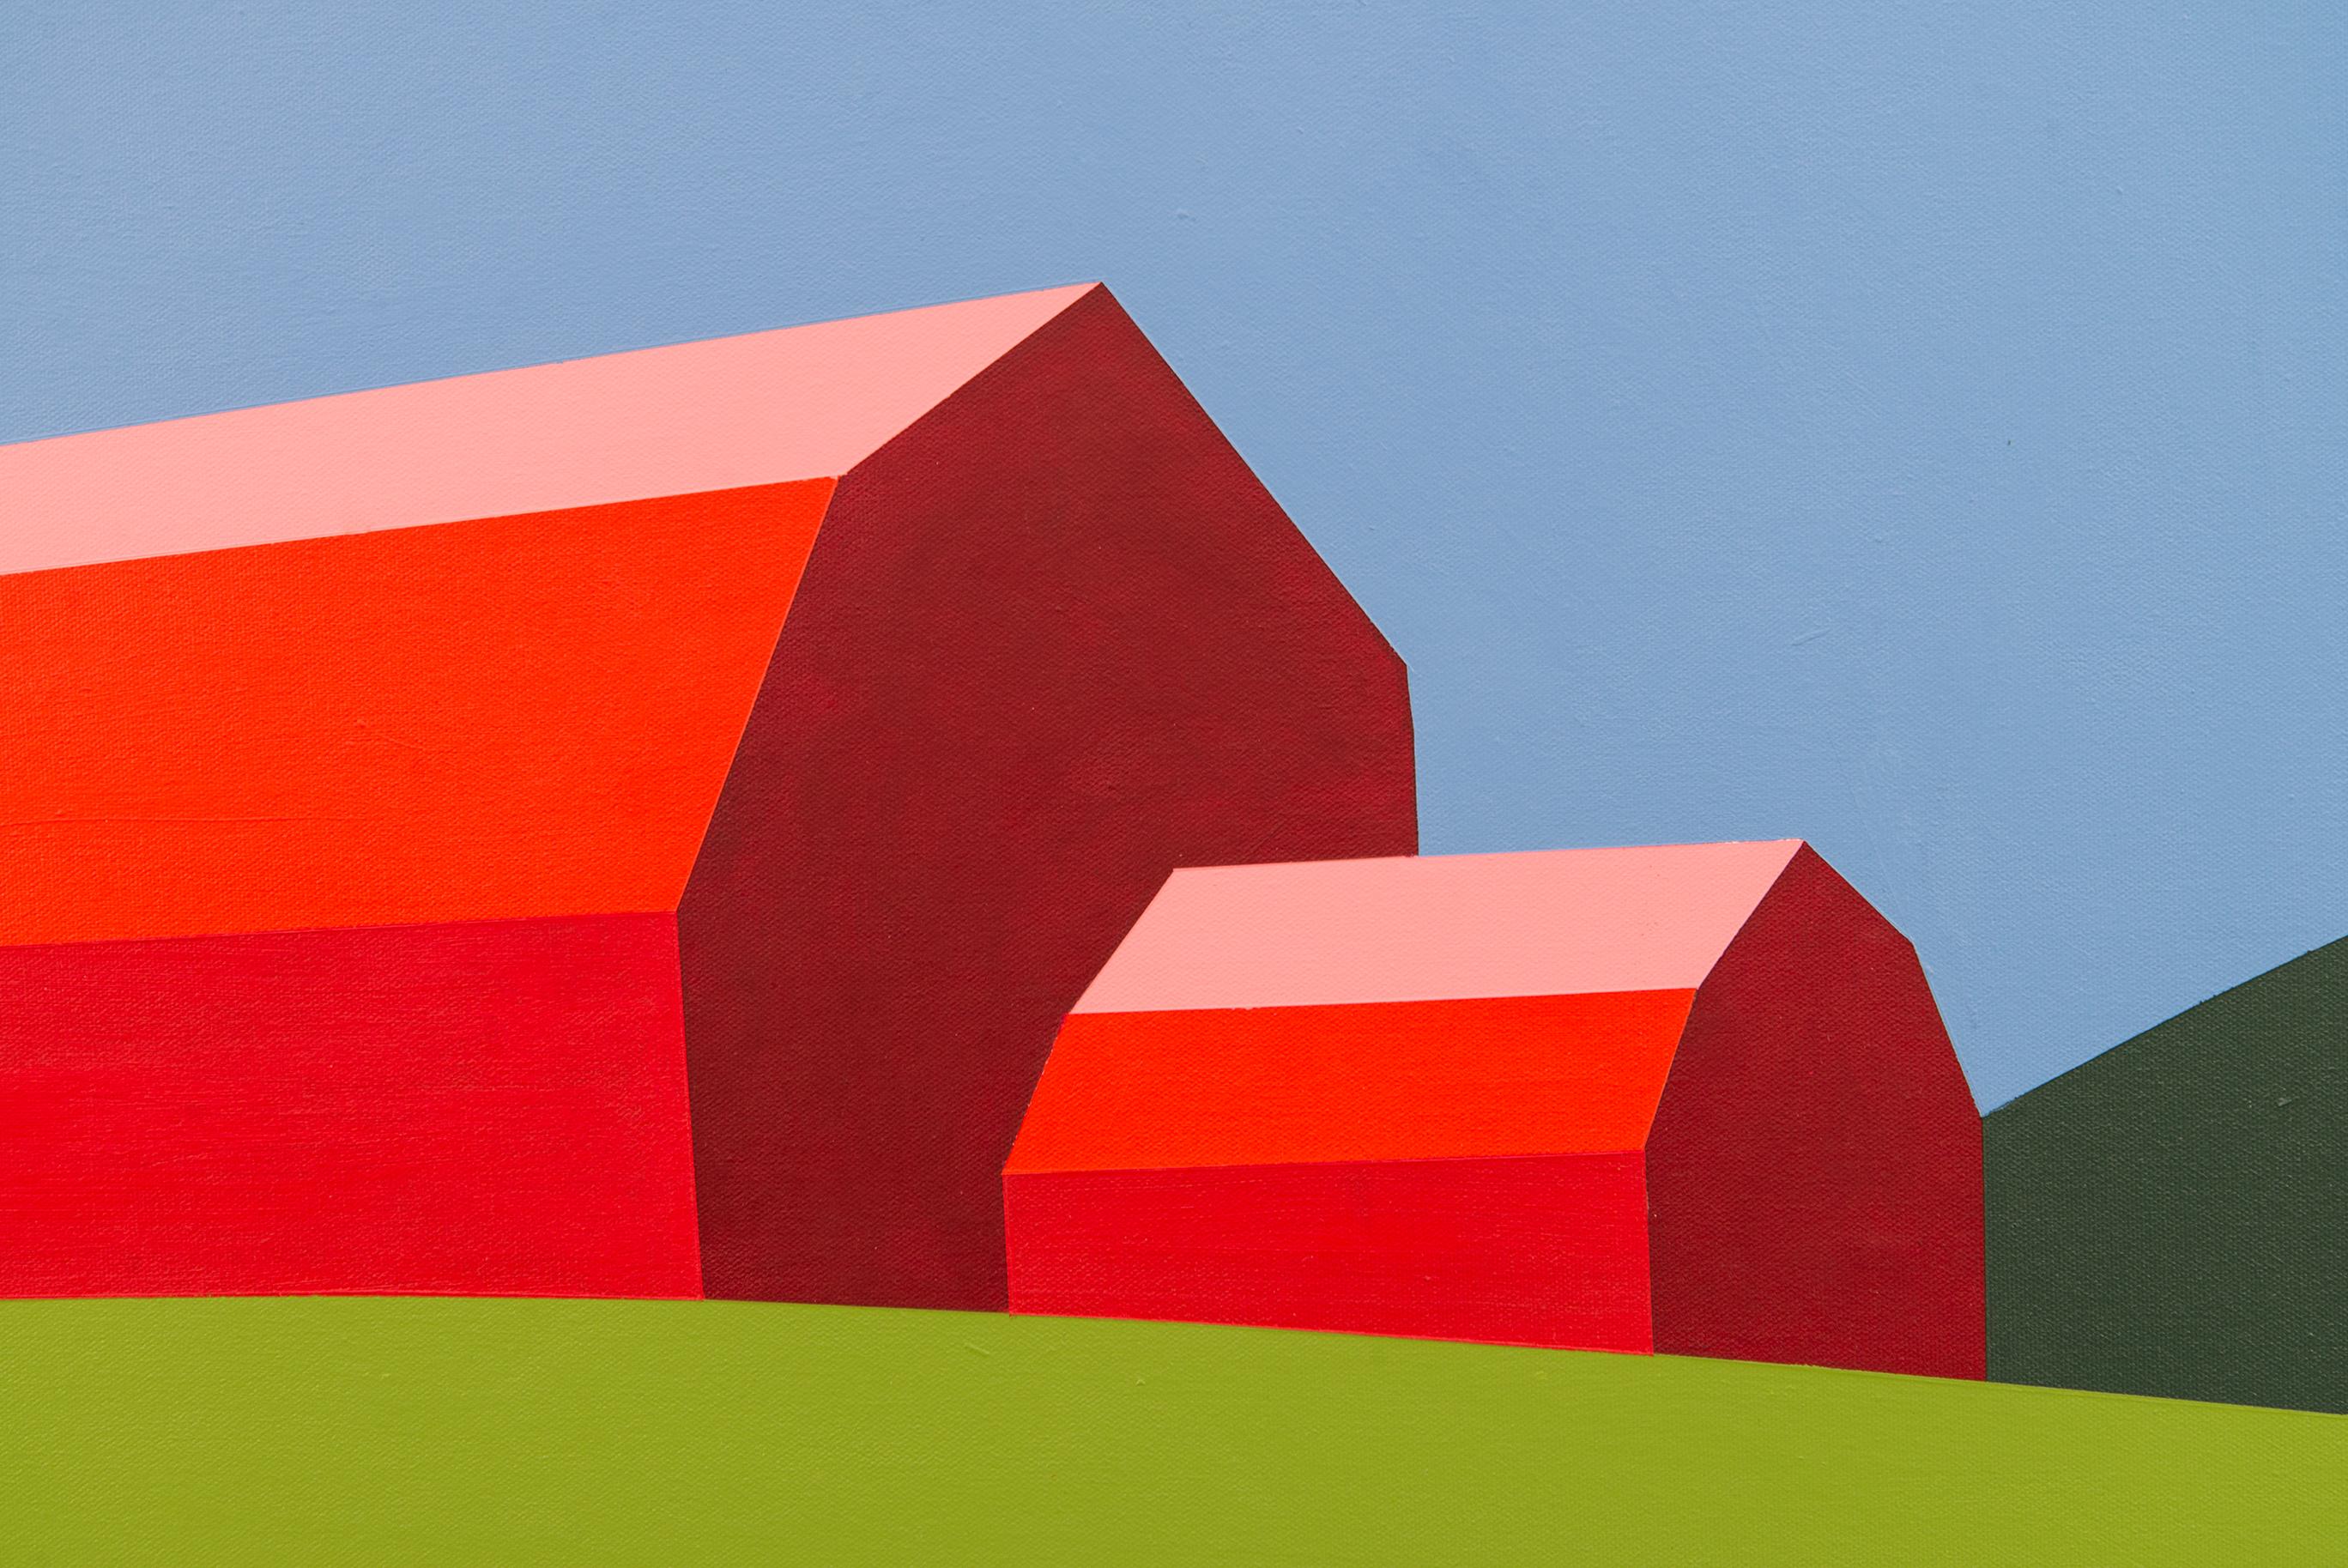 Red Barn Green Field - landscape, abstracted, pop-art, acrylic on canvas - Contemporary Painting by Charles Pachter